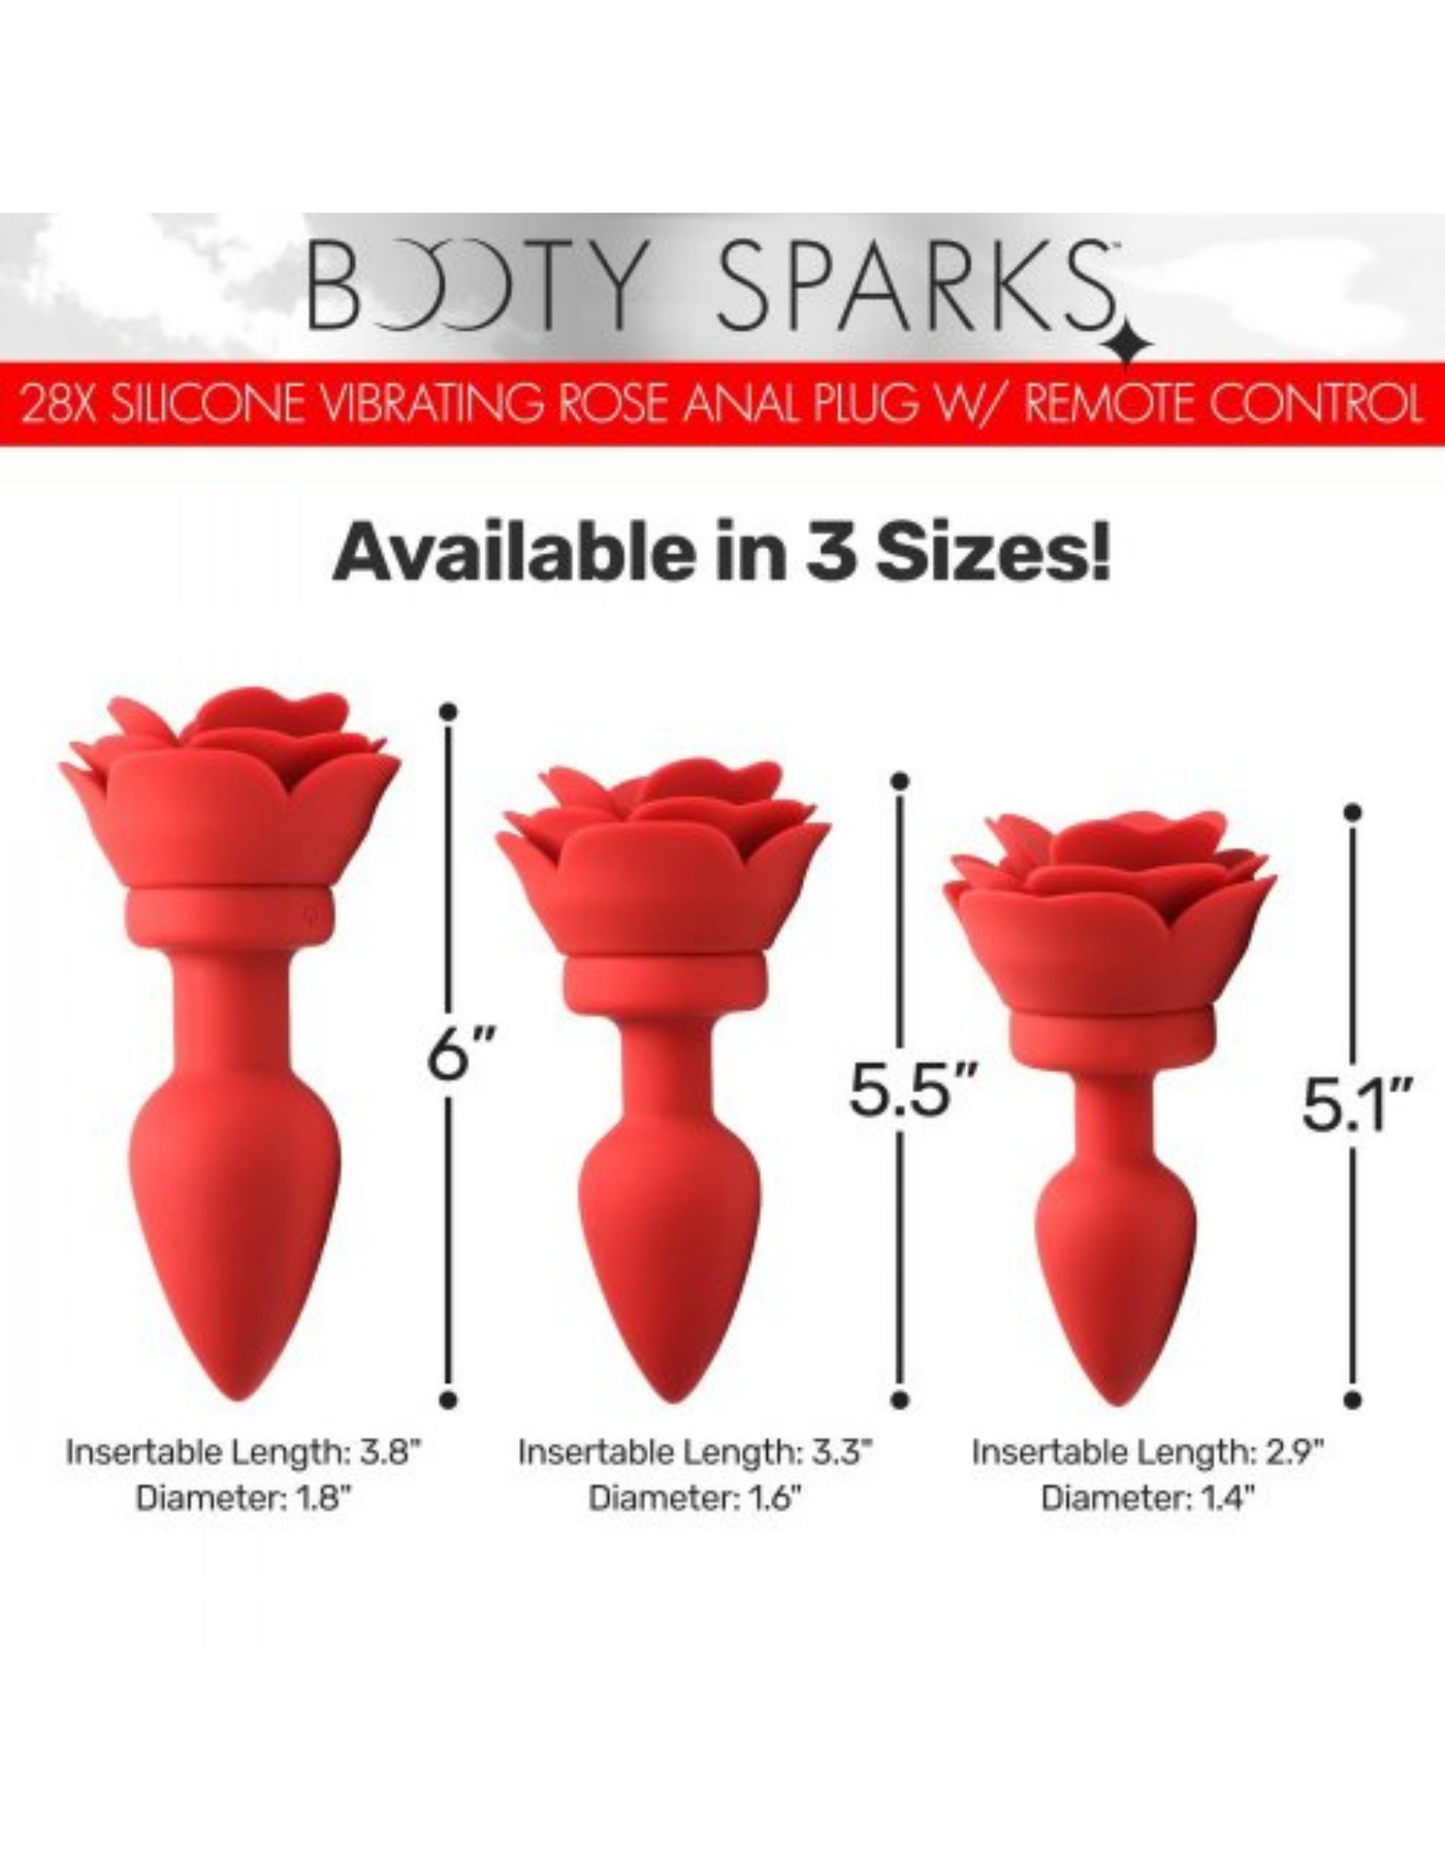 Images show the dimensions and measurements of the various size options of this butt plug as described in this product.